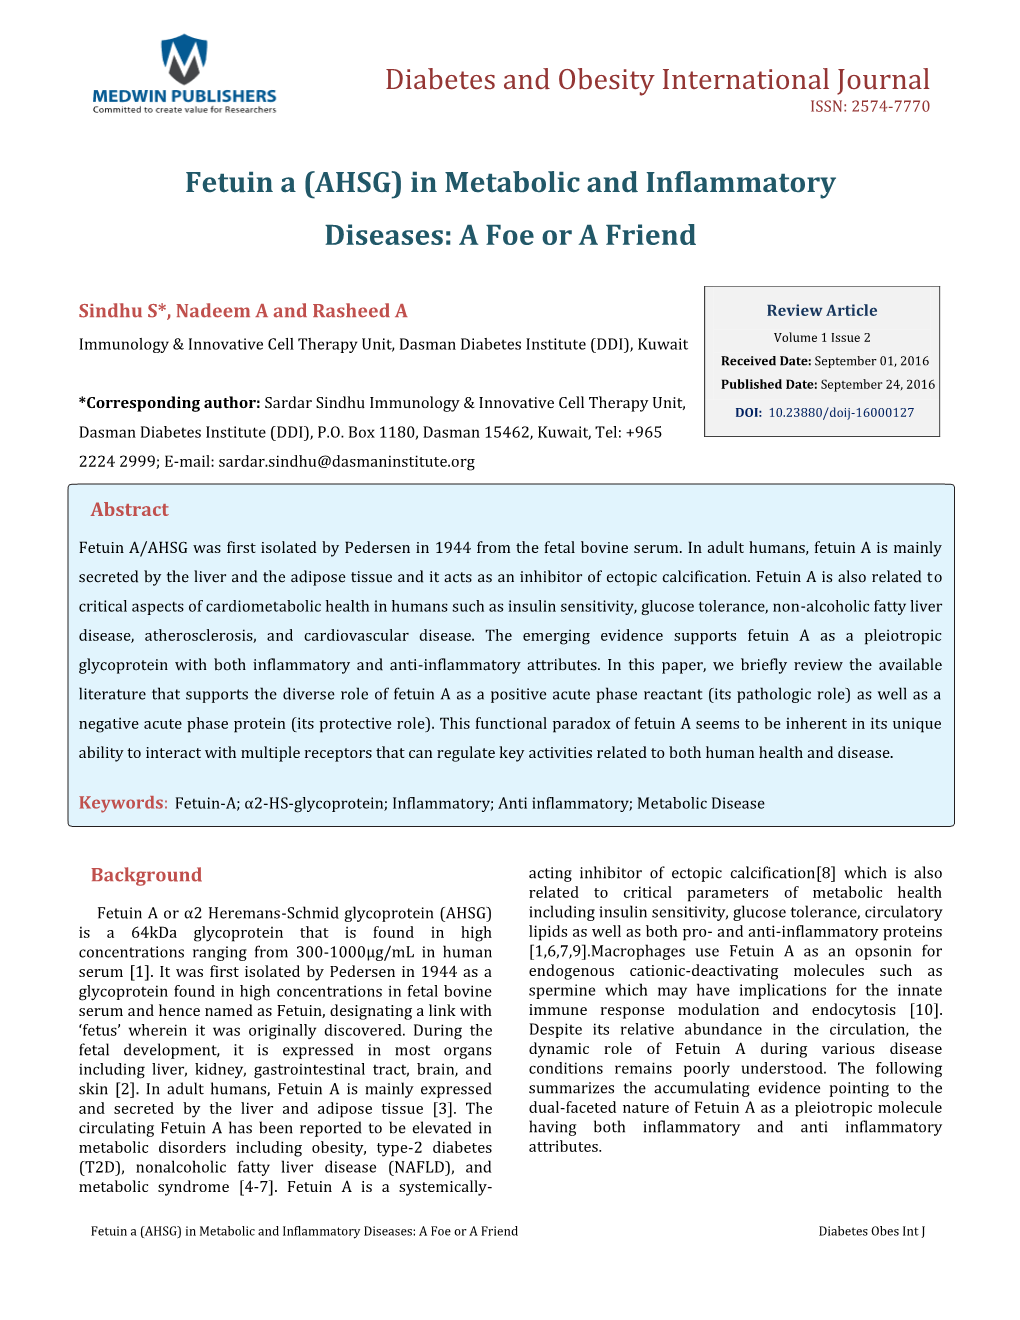 In Metabolic and Inflammatory Diseases: a Foe Or a Friend